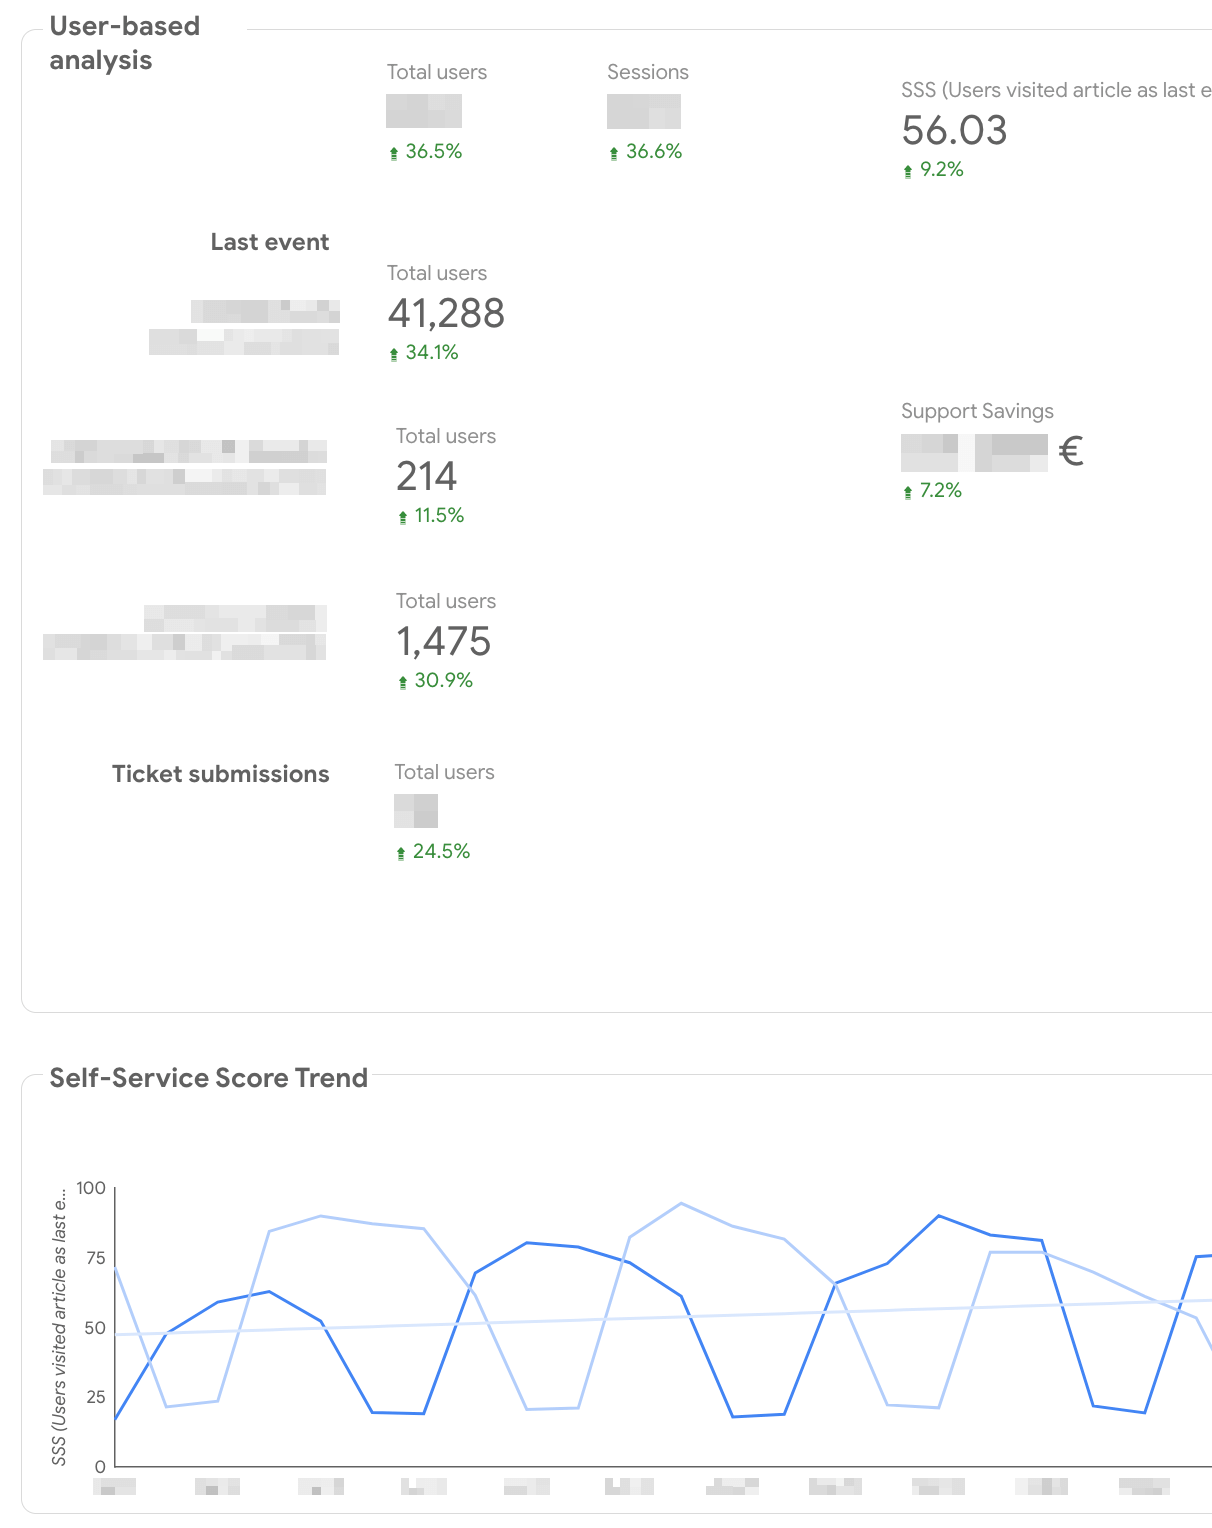 Looker Studio dashboard, showing a Self-Service Score using data from Google Analytics to track the Self-Service Score and estimated savings offered by the Help Center over time.